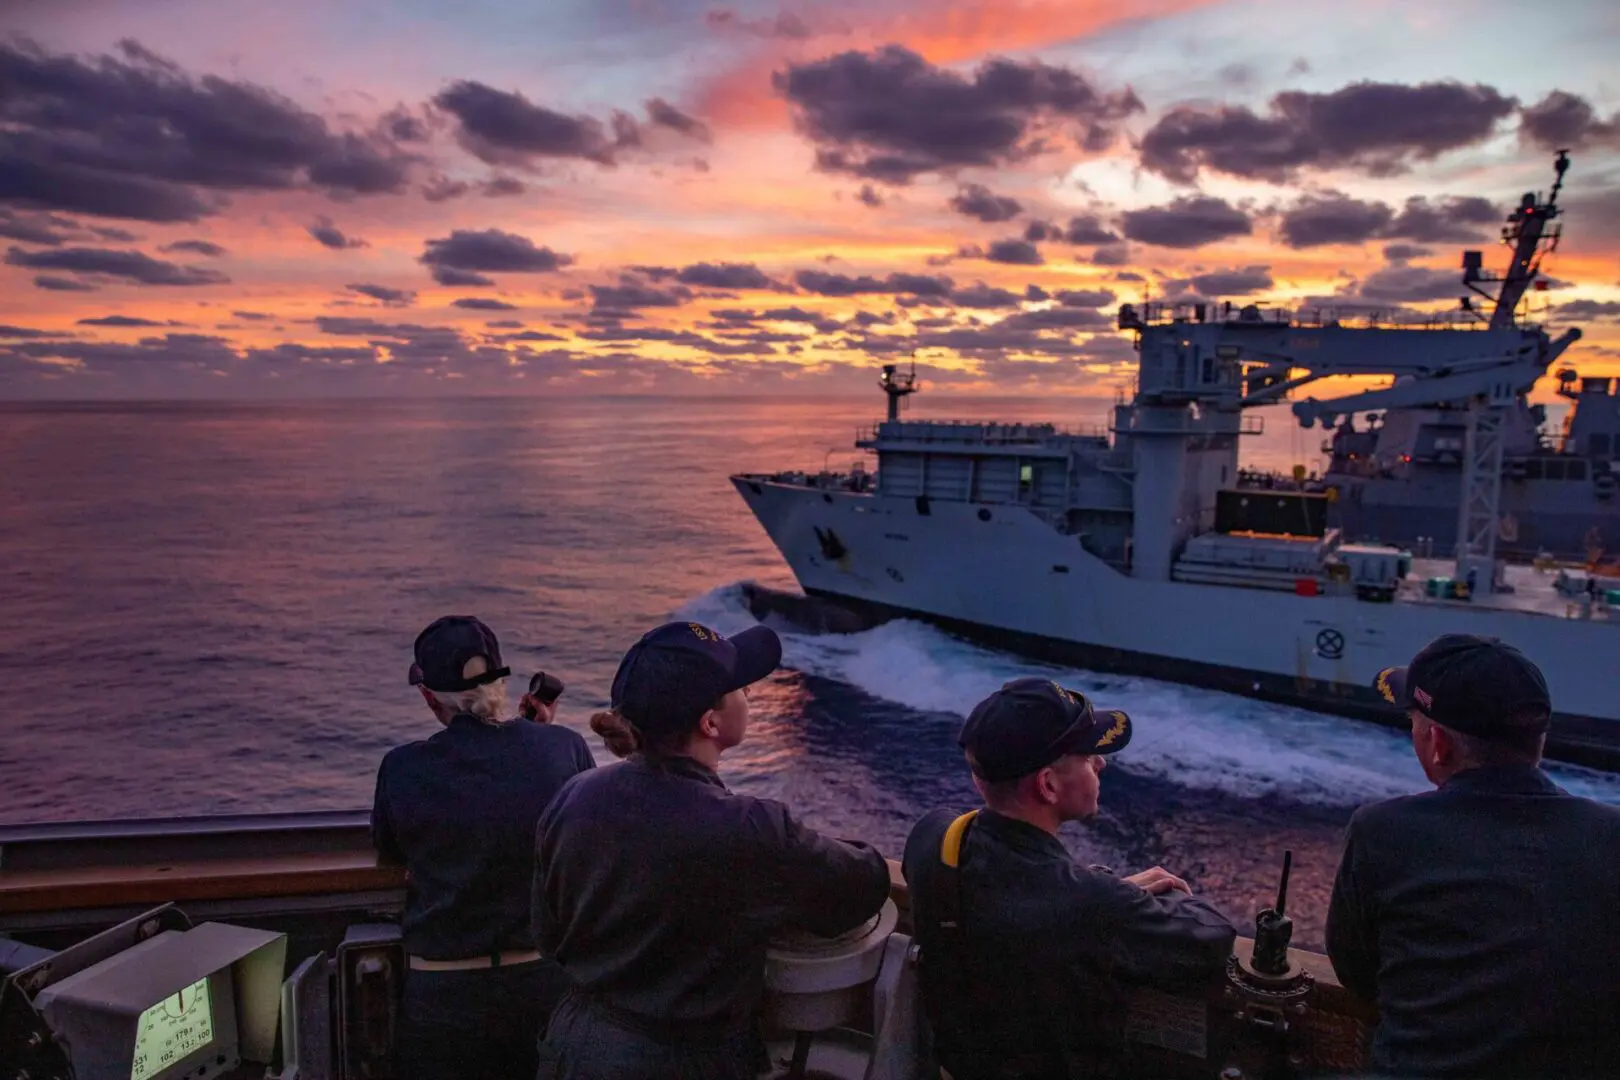 ATLANTIC OCEAN (Oct. 16, 2022) Sailors assigned to the Arleigh Burke-class guided-missile destroyer USS Ramage (DDG 61) look on during a replenishment-at-sea with the Royal Canadian supply ship MV Asterix as part of the Gerald R. Ford Carrier Strike Group, Oct. 17, 2022. The first-in-class aircraft carrier USS Gerald R. Ford (CVN 78) is on its inaugural deployment conducting training and operations alongside NATO Allies and partners to enhance integration for future operations and demonstrate the U.S. NavyÕs commitment to a peaceful, stable and conflict free Atlantic region. (U.S. Navy photo by Mass Communication Specialist 2nd Class Sawyer Connally)